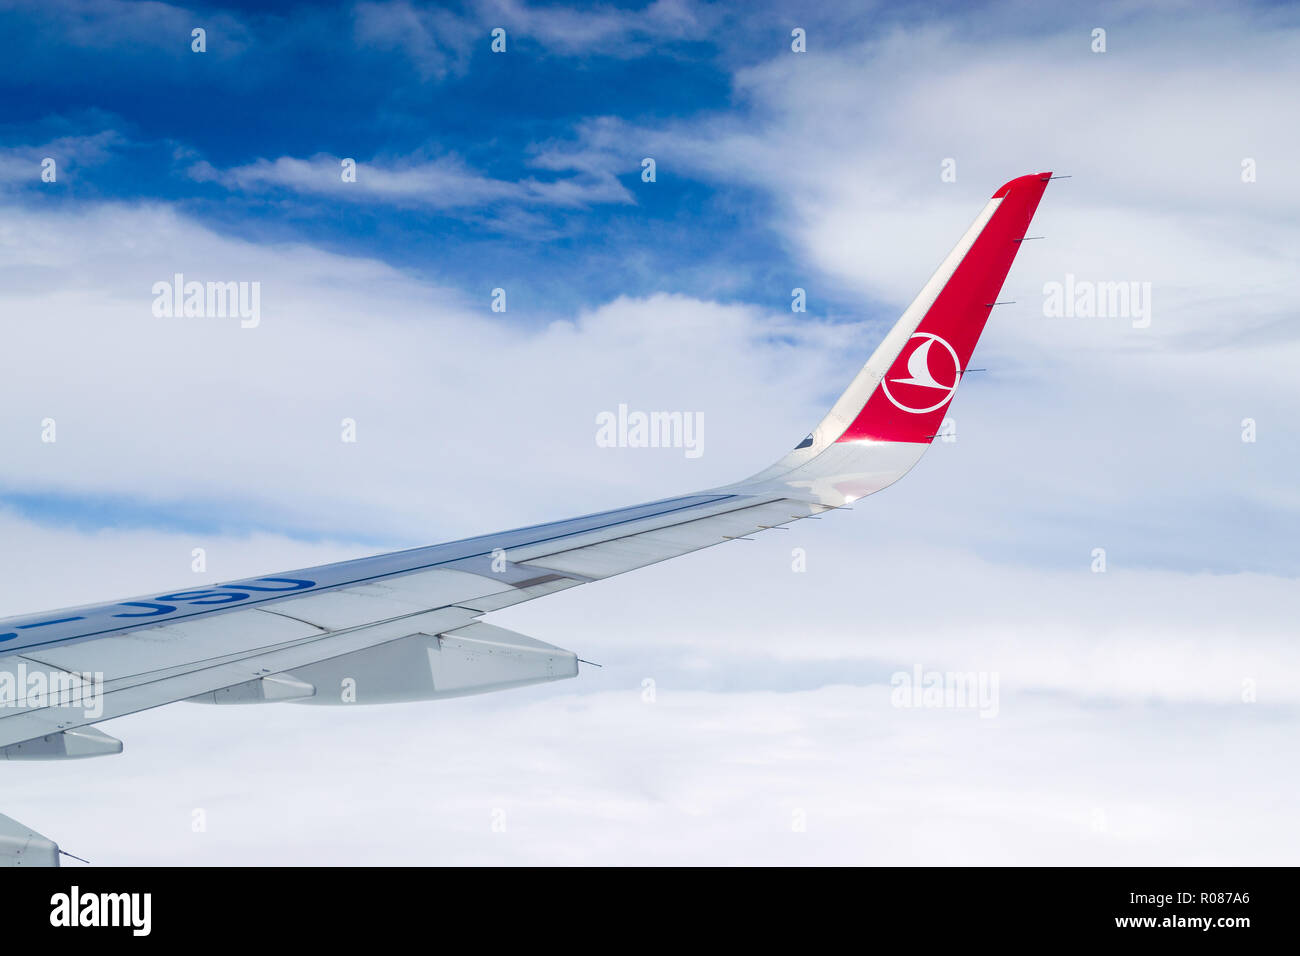 Interior Cabin View Of A Turkish Airlines Airbus A321 Wing